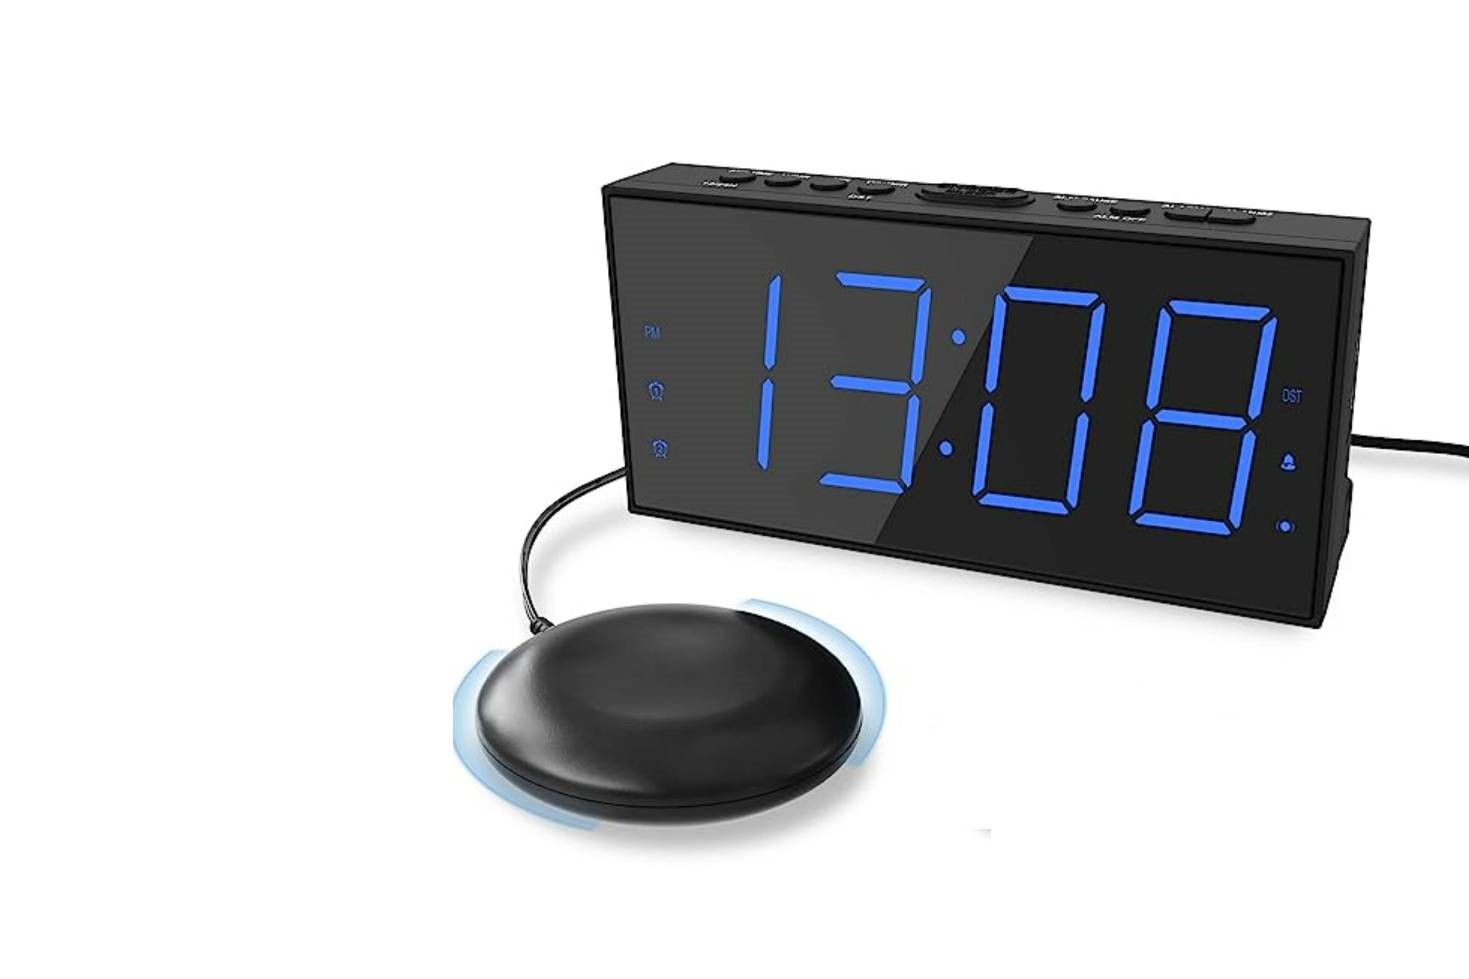 Vibrating alarm clock showing the LED display of time in blue, and the round-shaped vibrating unit.